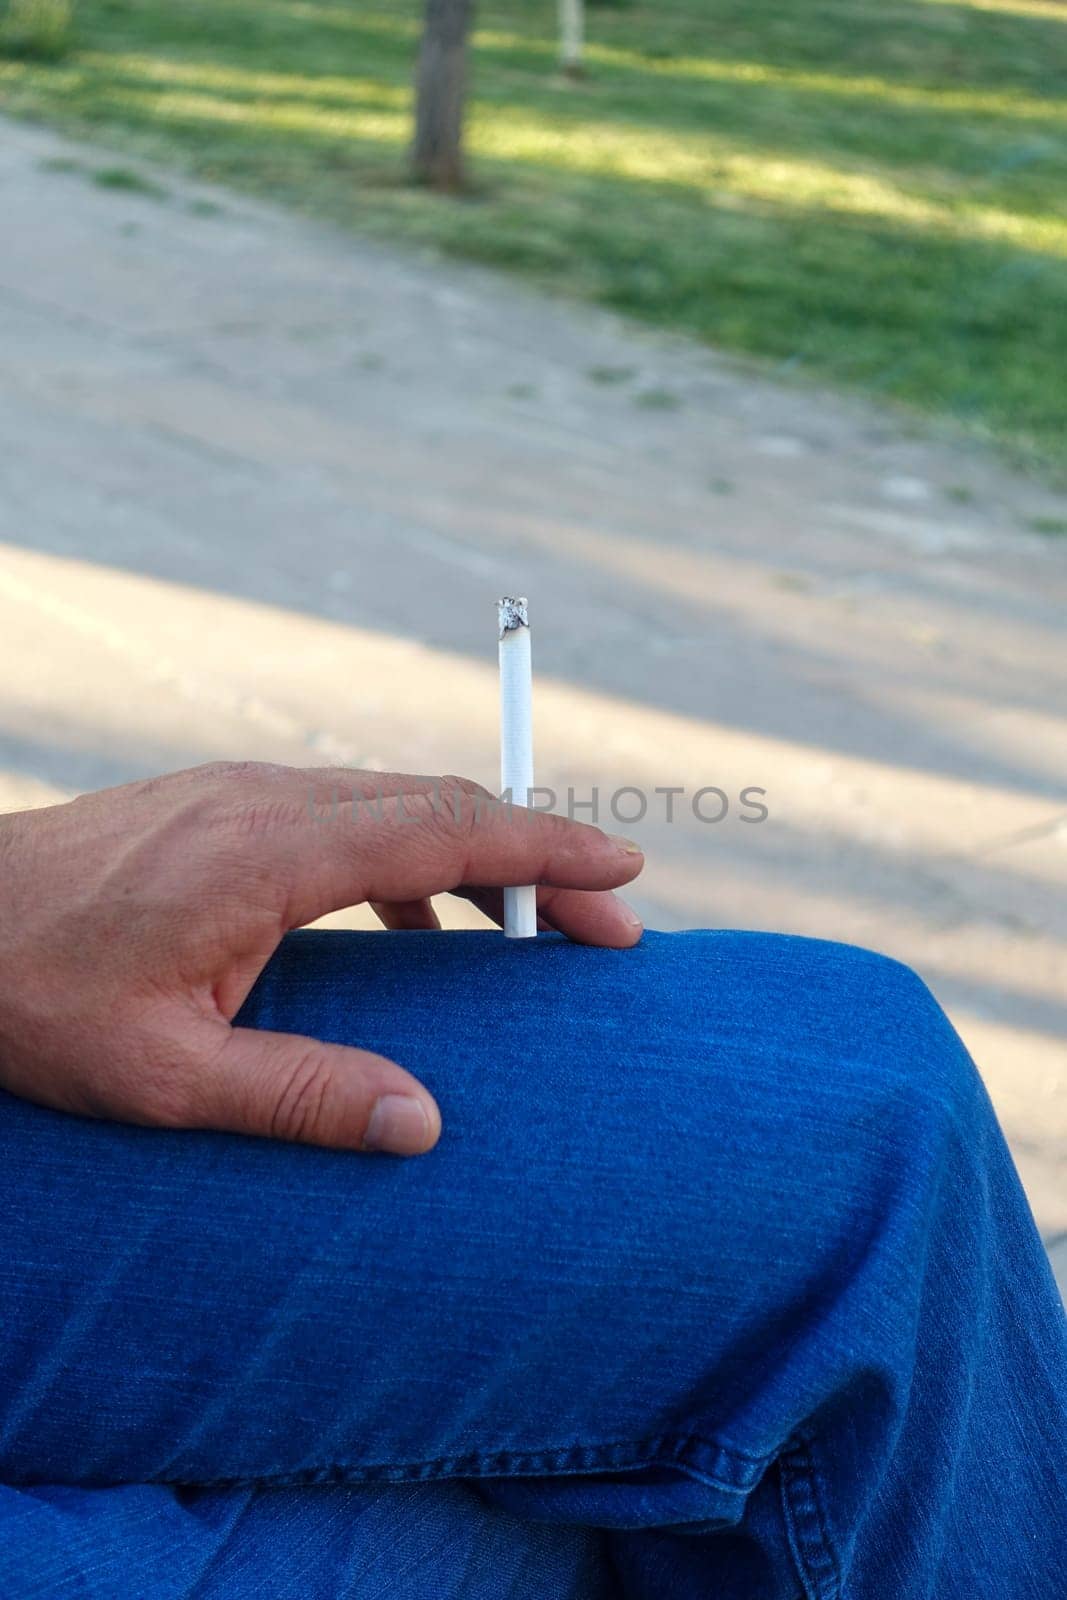 cigarette standing in a person's hand,close-up of a hand holding a cigarette, by nhatipoglu